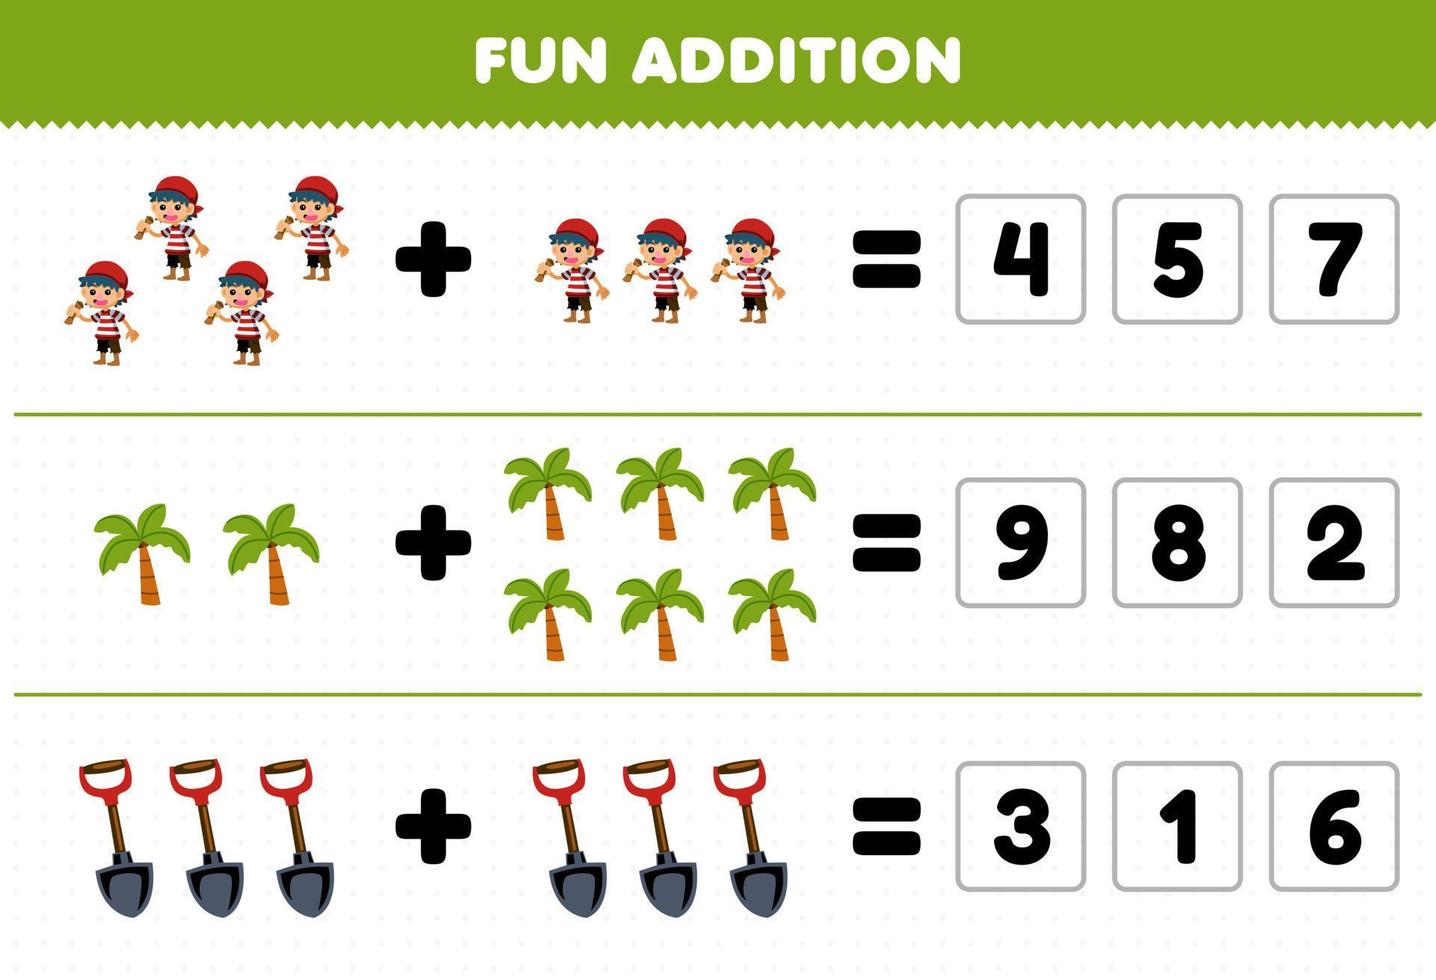 Education game for children fun addition by guess the correct number of cute cartoon boy tree and shovel printable pirate worksheet vector